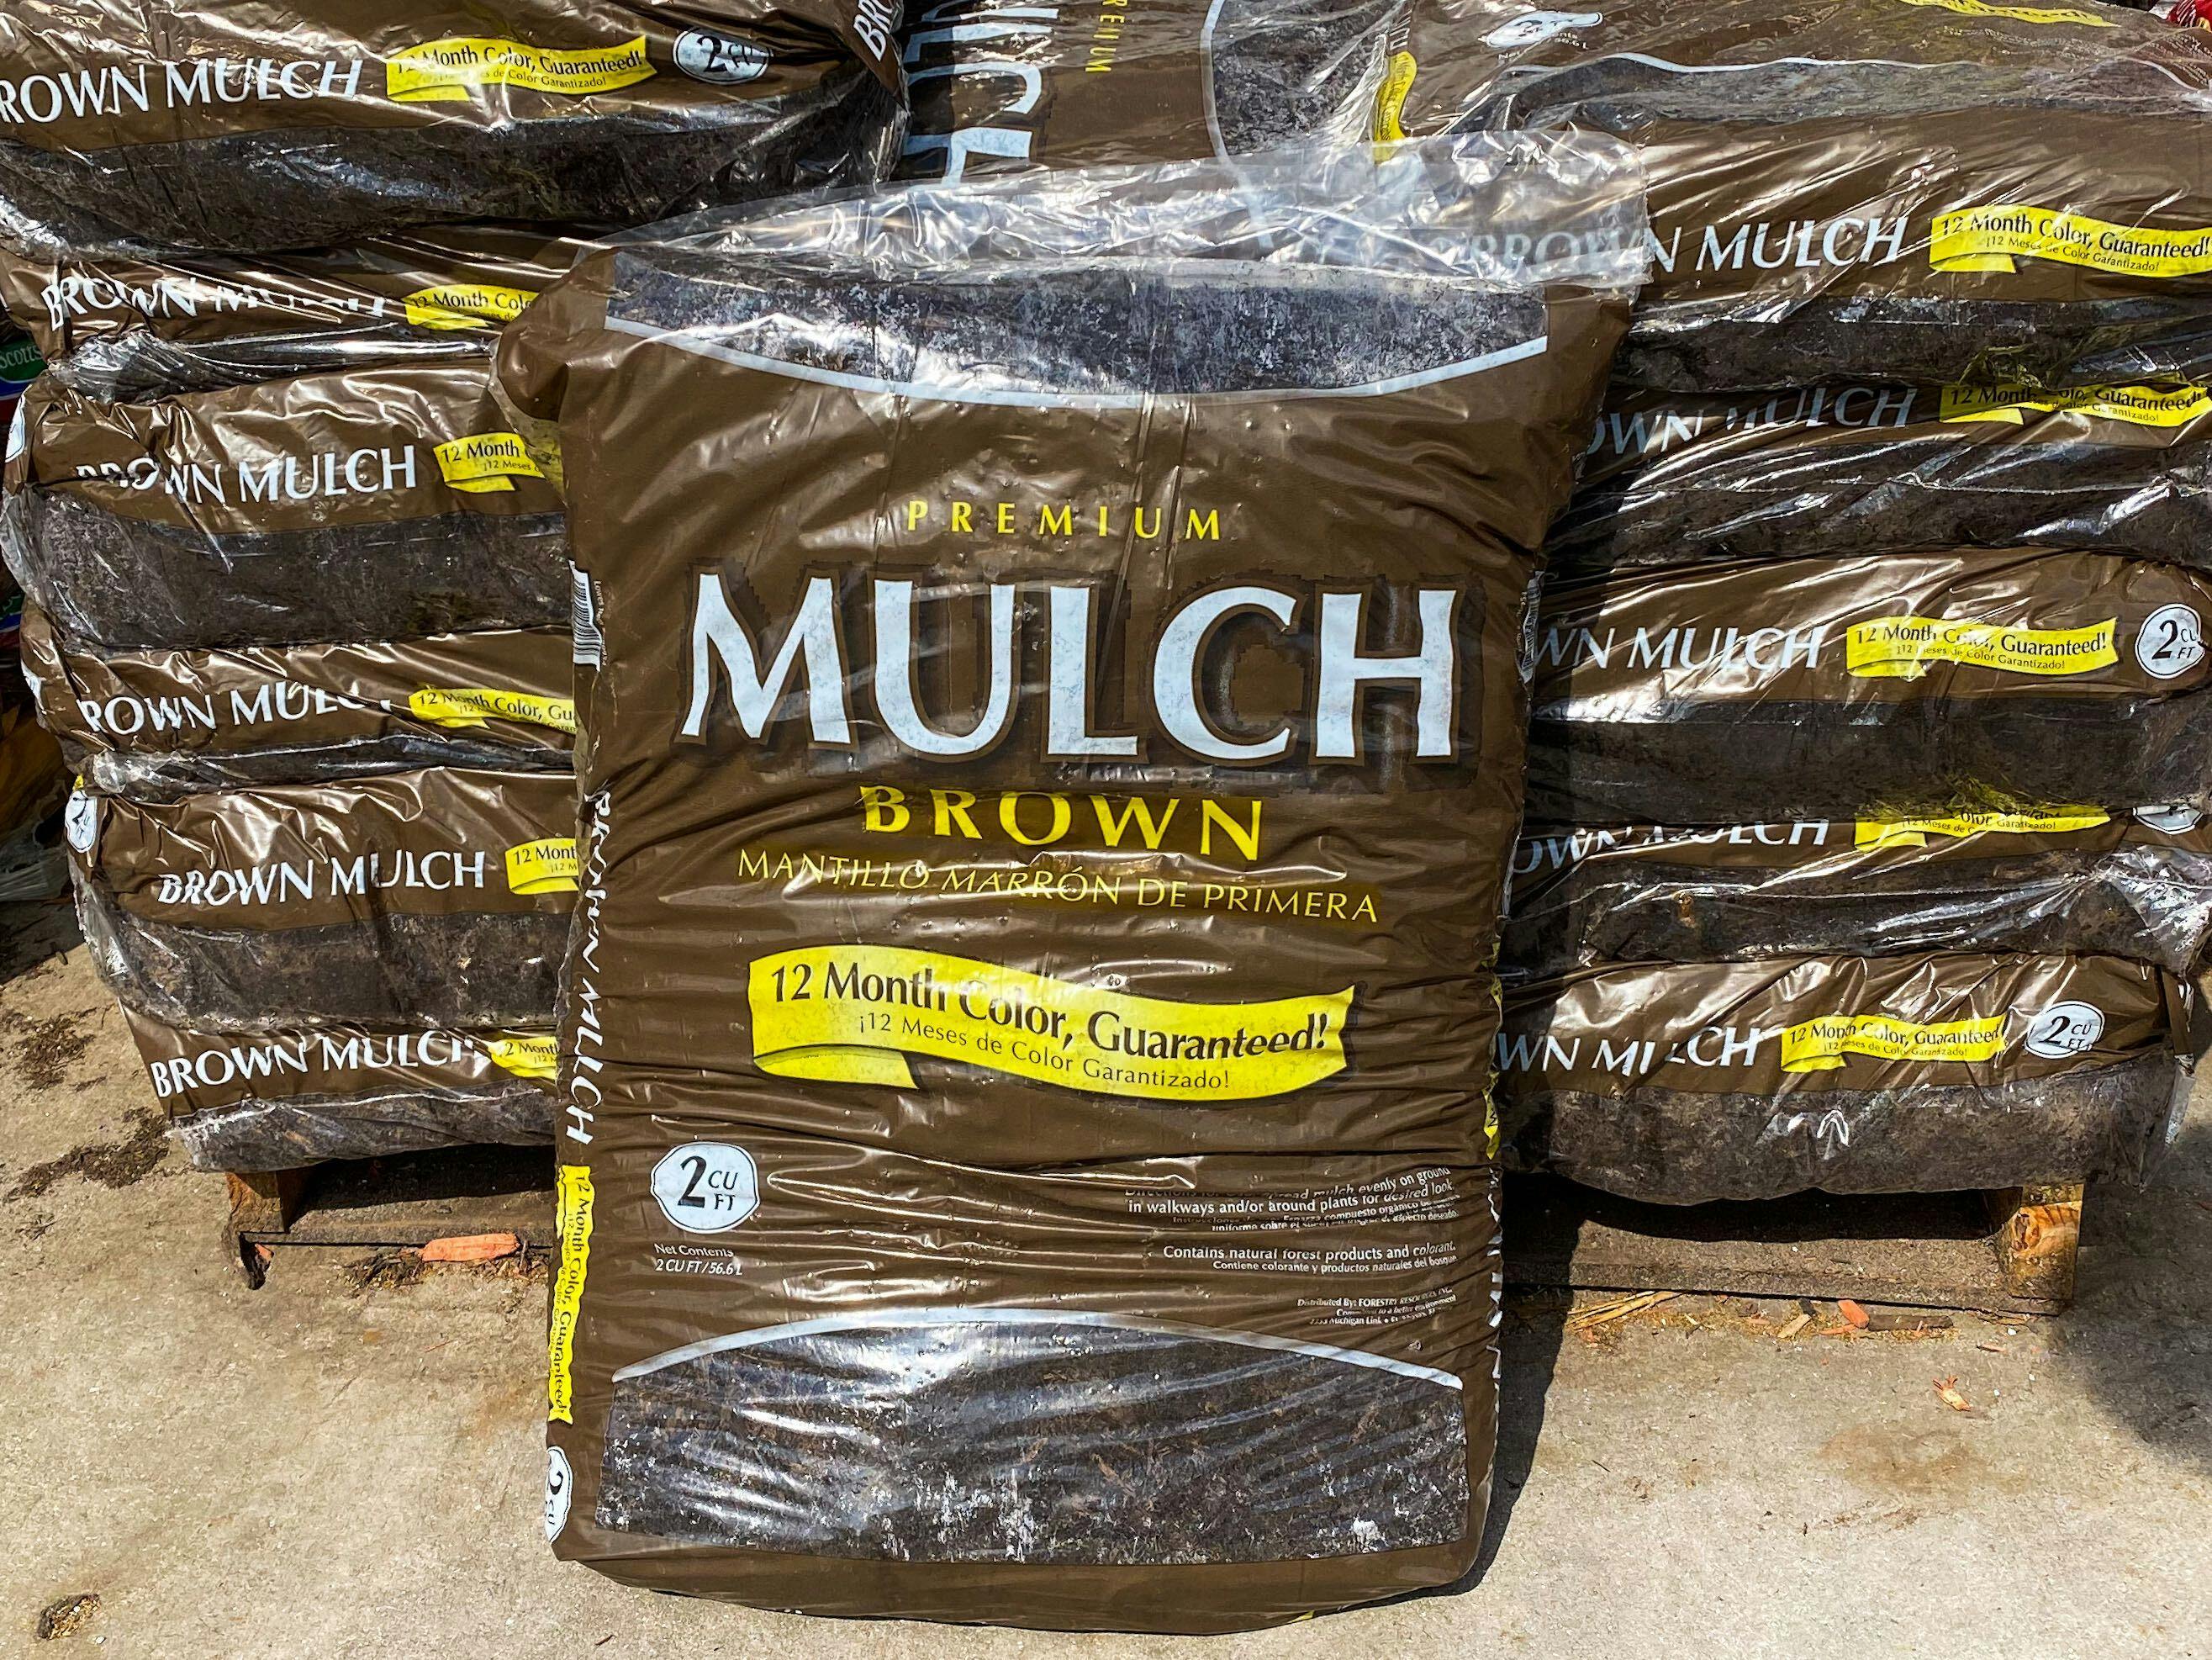 Bagged Mulch at Lowes.com